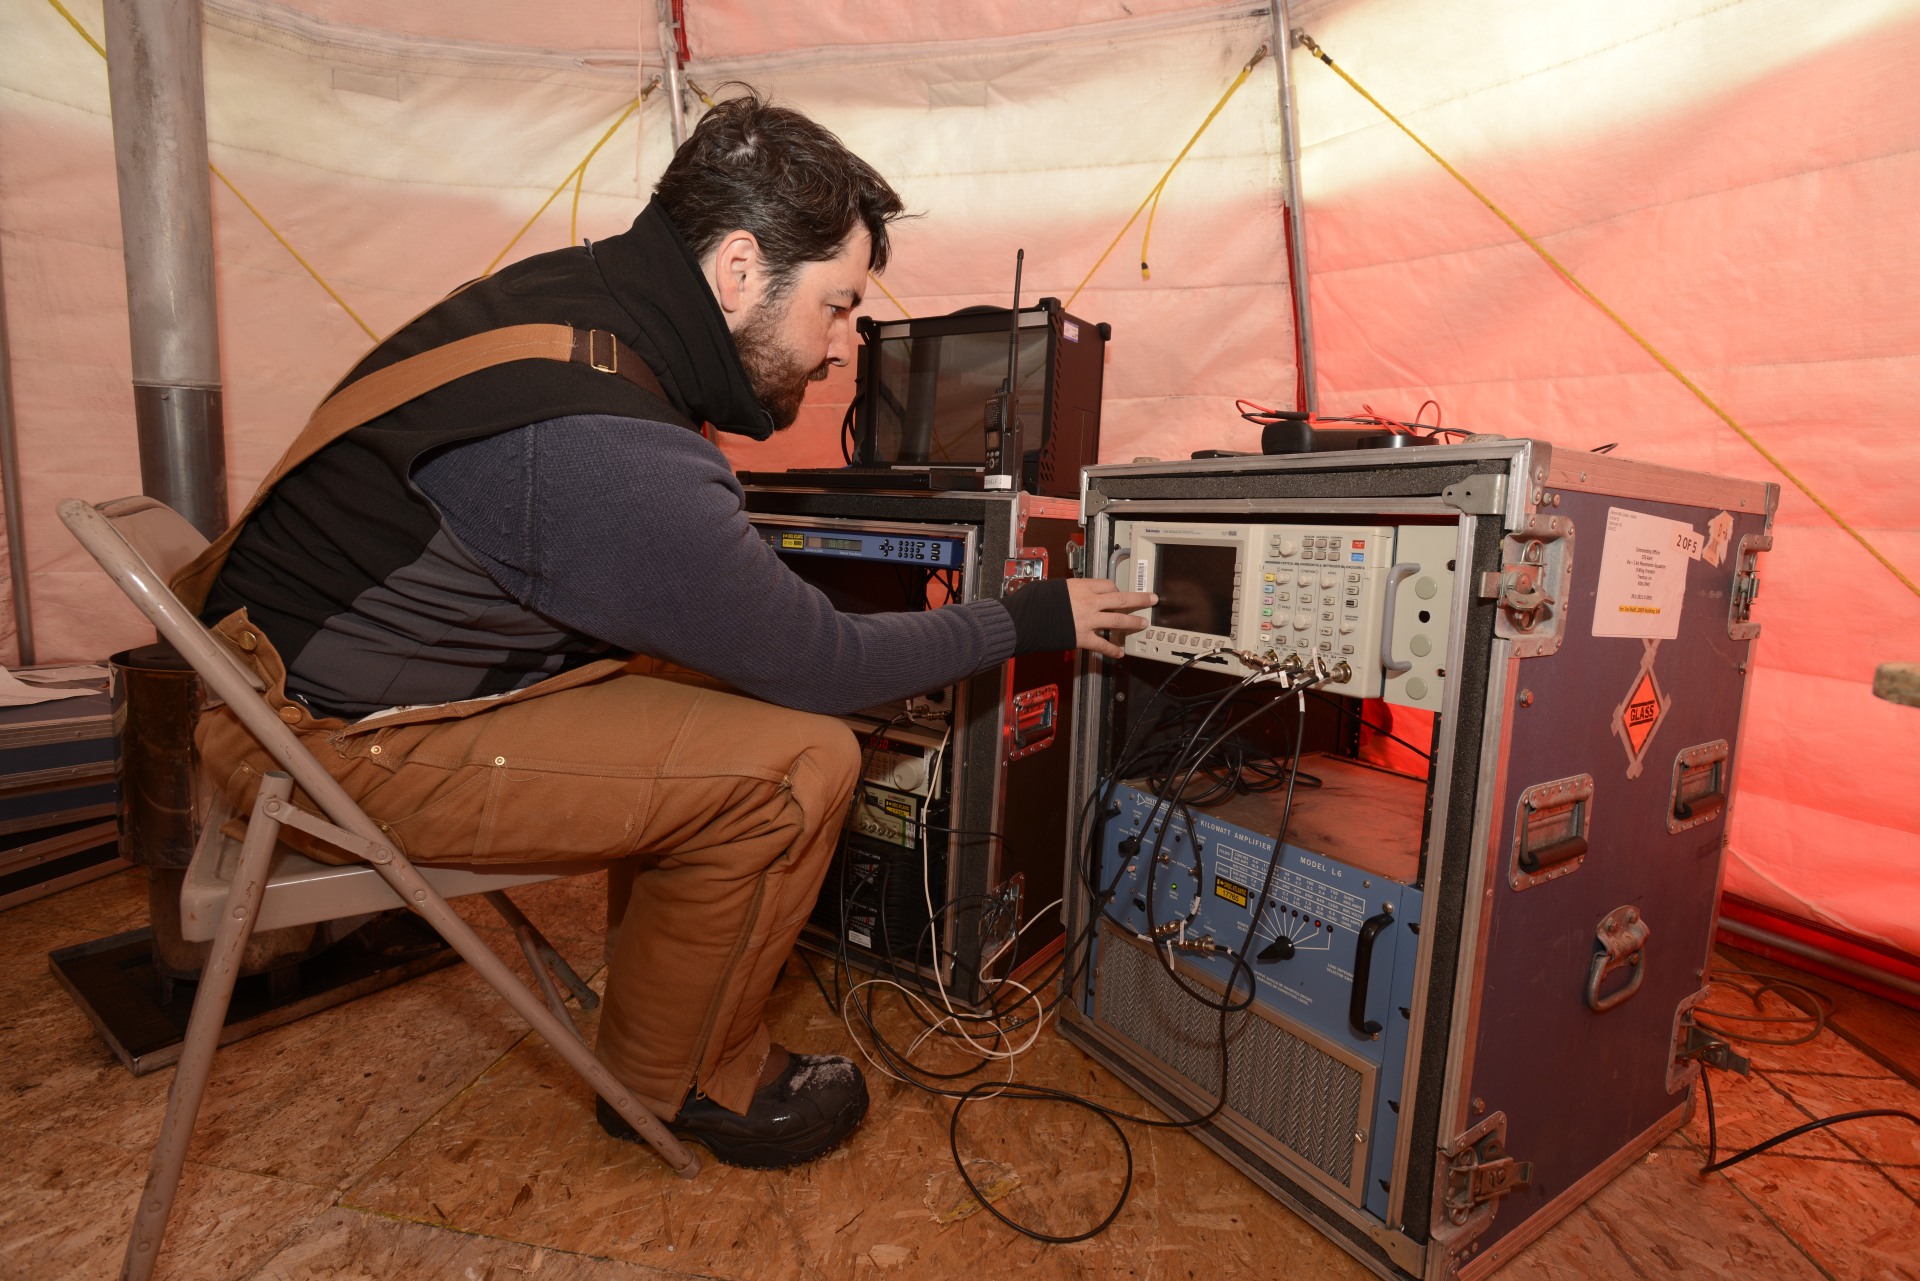 Technologists keep equipment working for all the experiments in the Arctic.
Photo by Janice Lang, DRDC